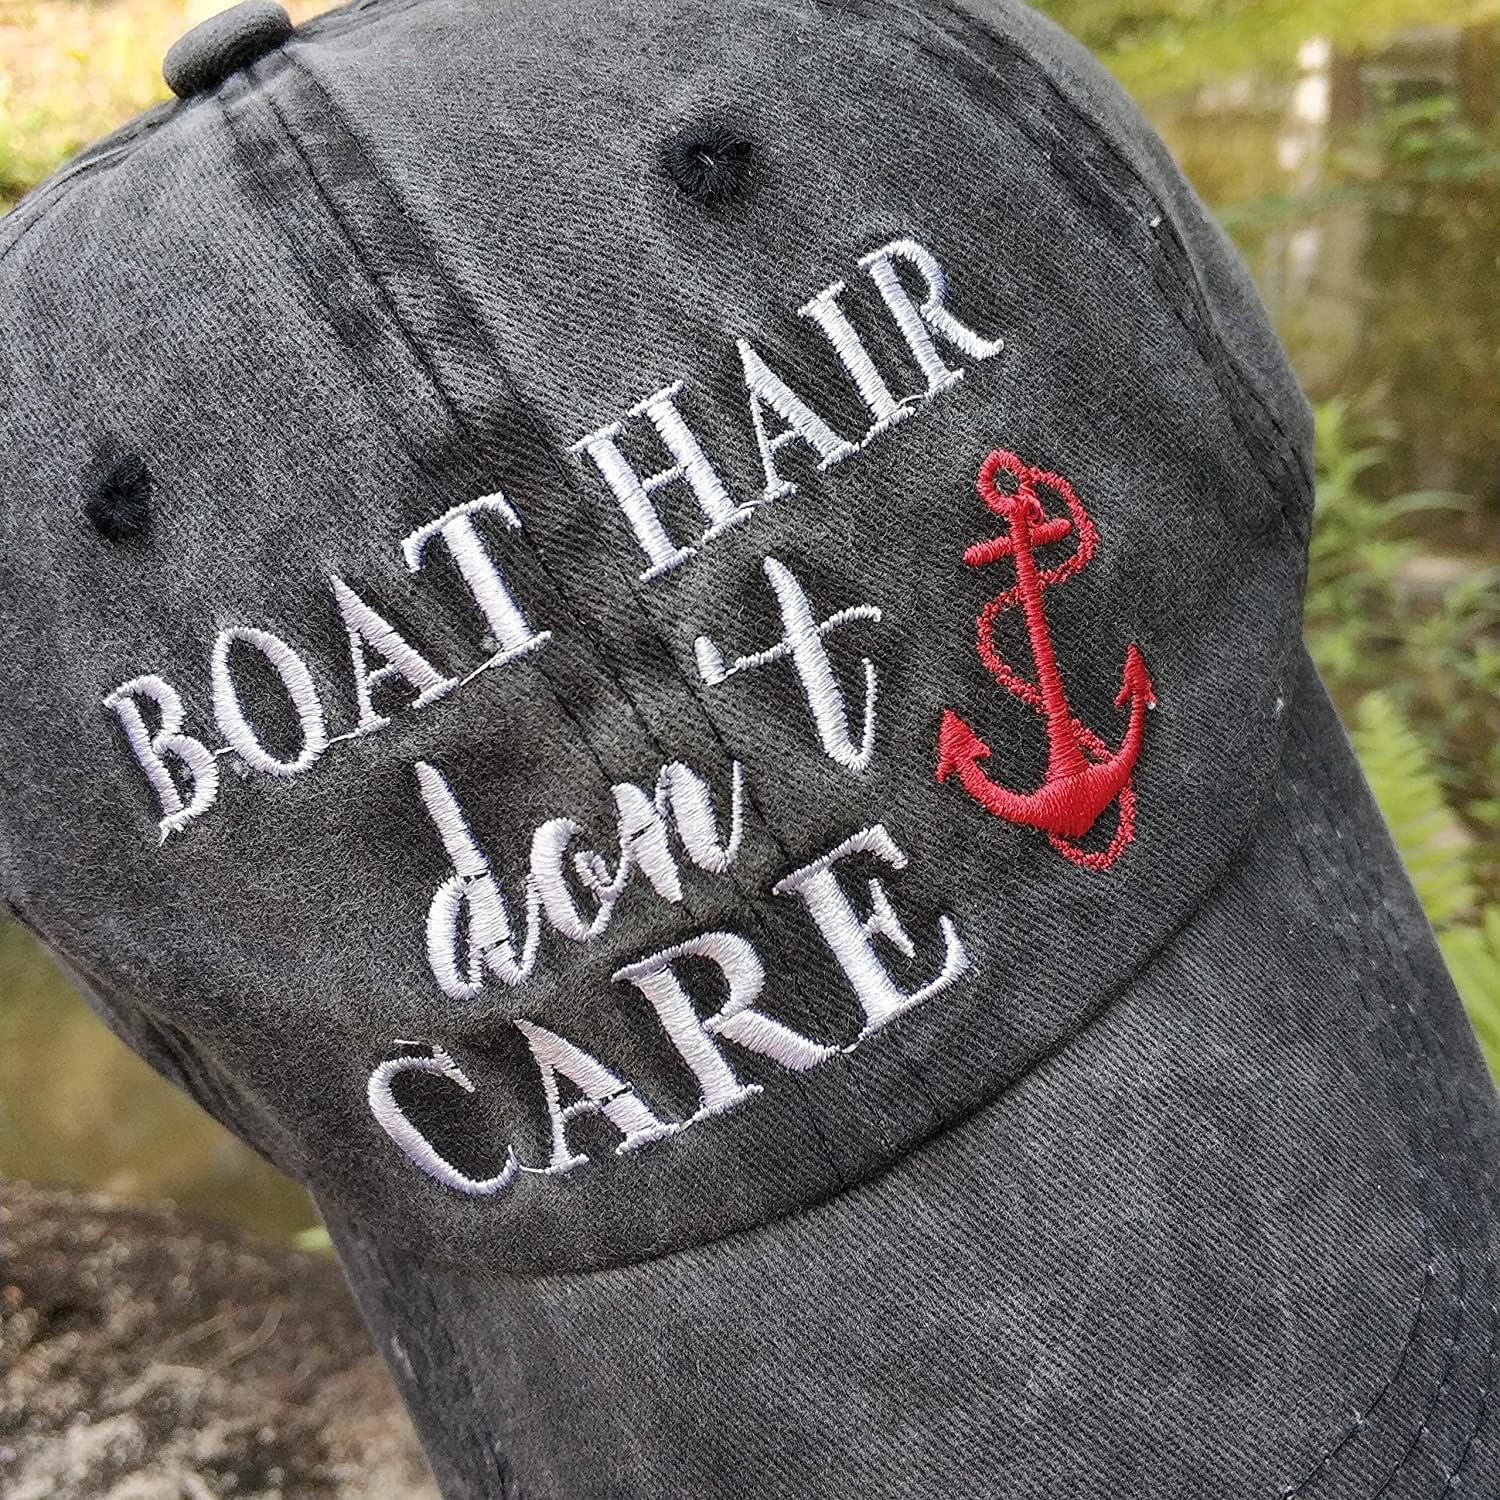 Womens Baseball Cap Embroidered Boat Hair Dont Care Vintage Distressed Dad Hat